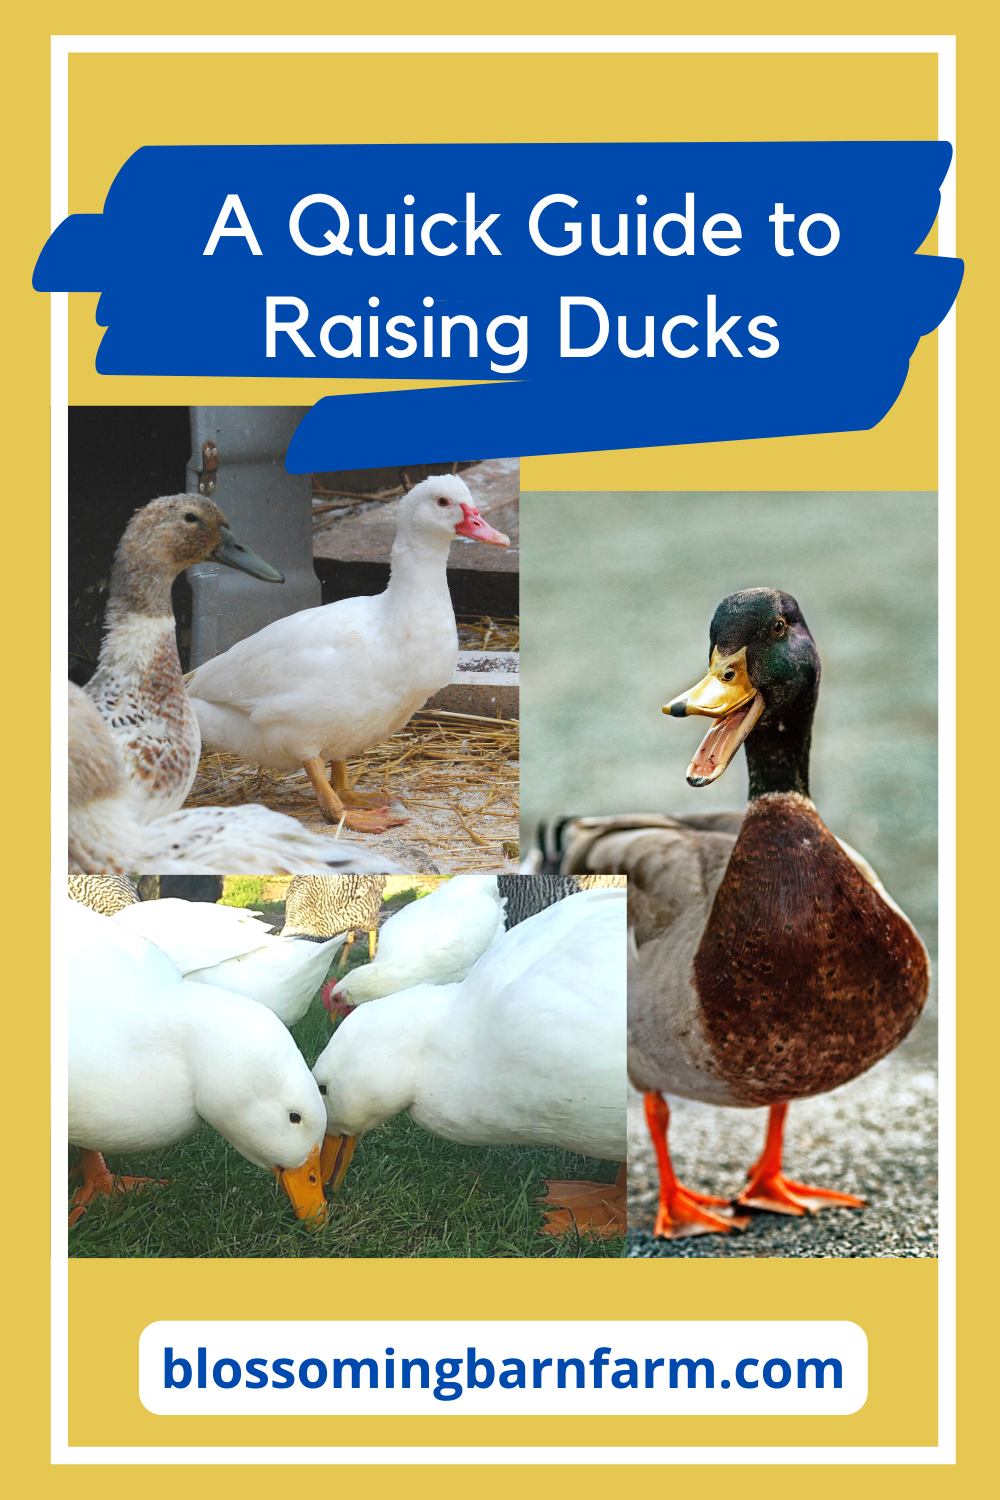 A Quick Guide to Raising Ducks - pictures of ducks on a yellow background